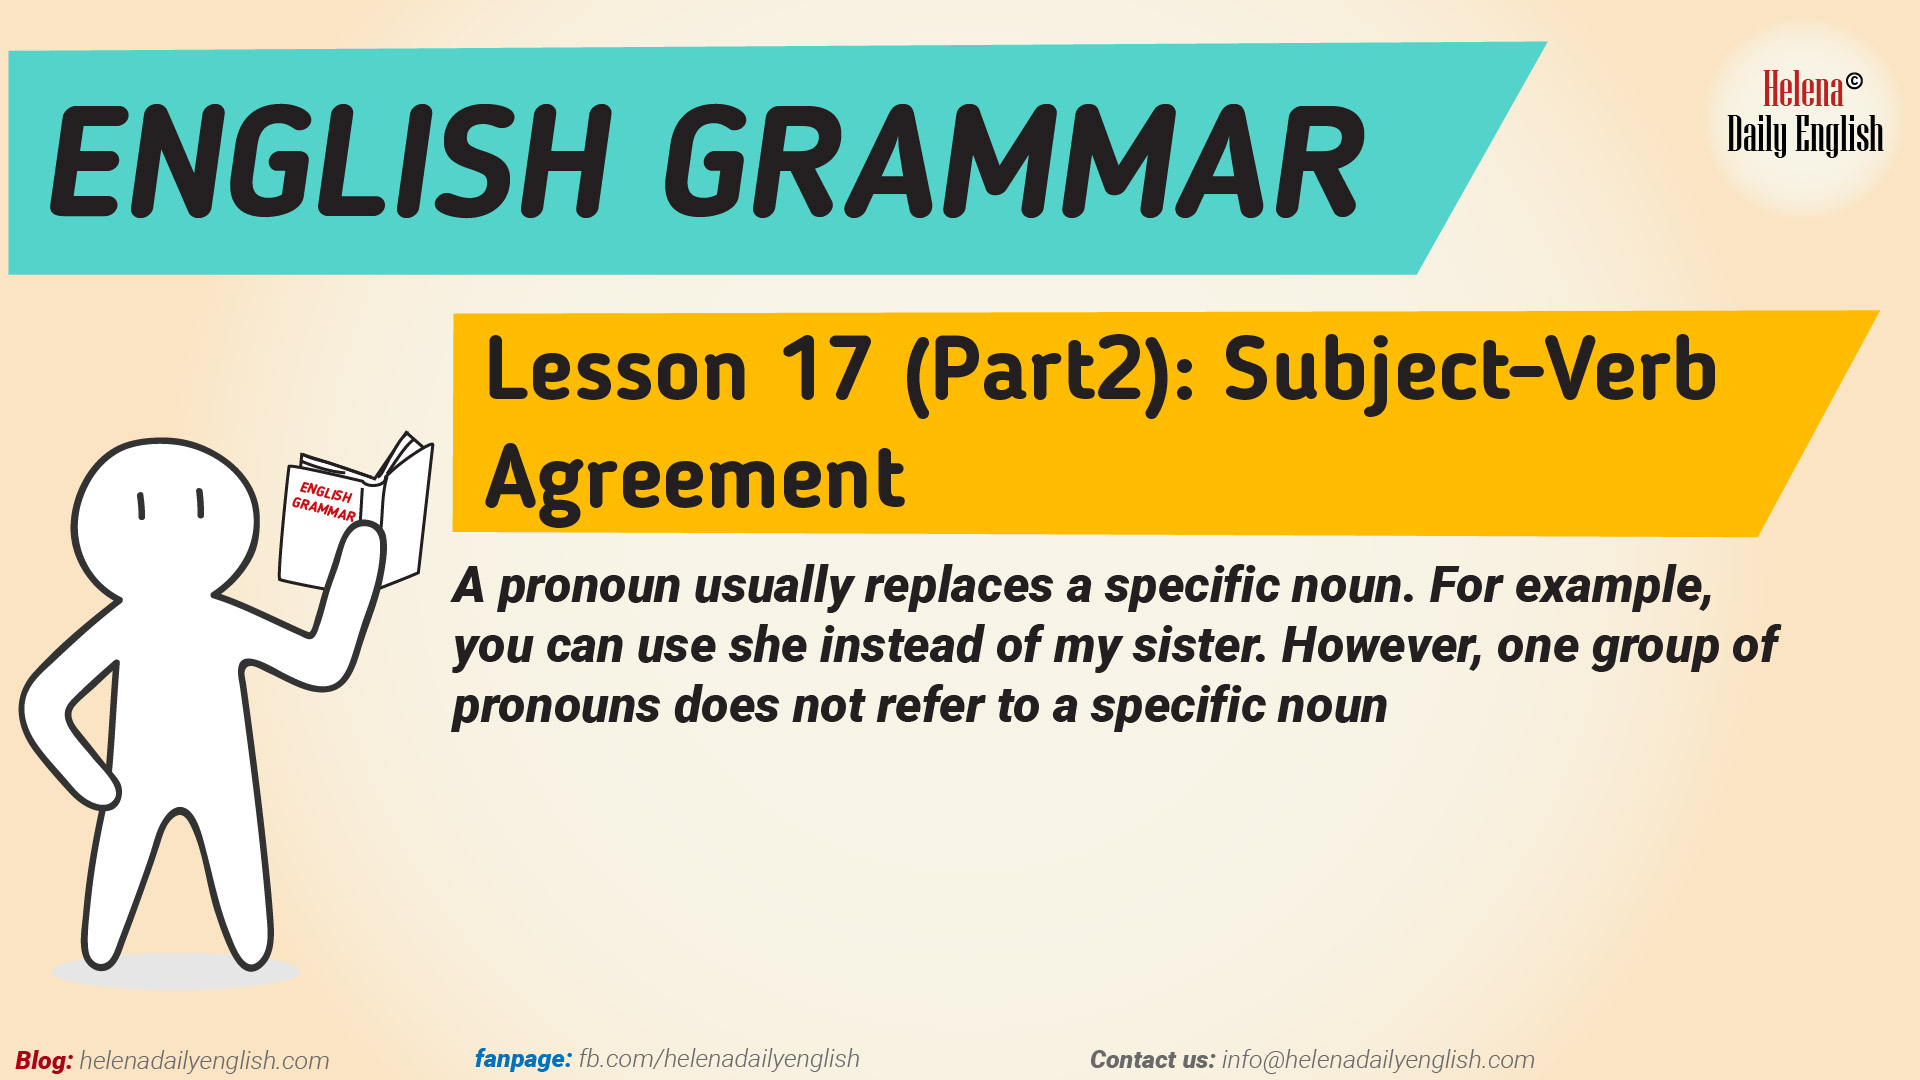 learn-english-grammar-lesson-17-part-2-subject-verb-agreement